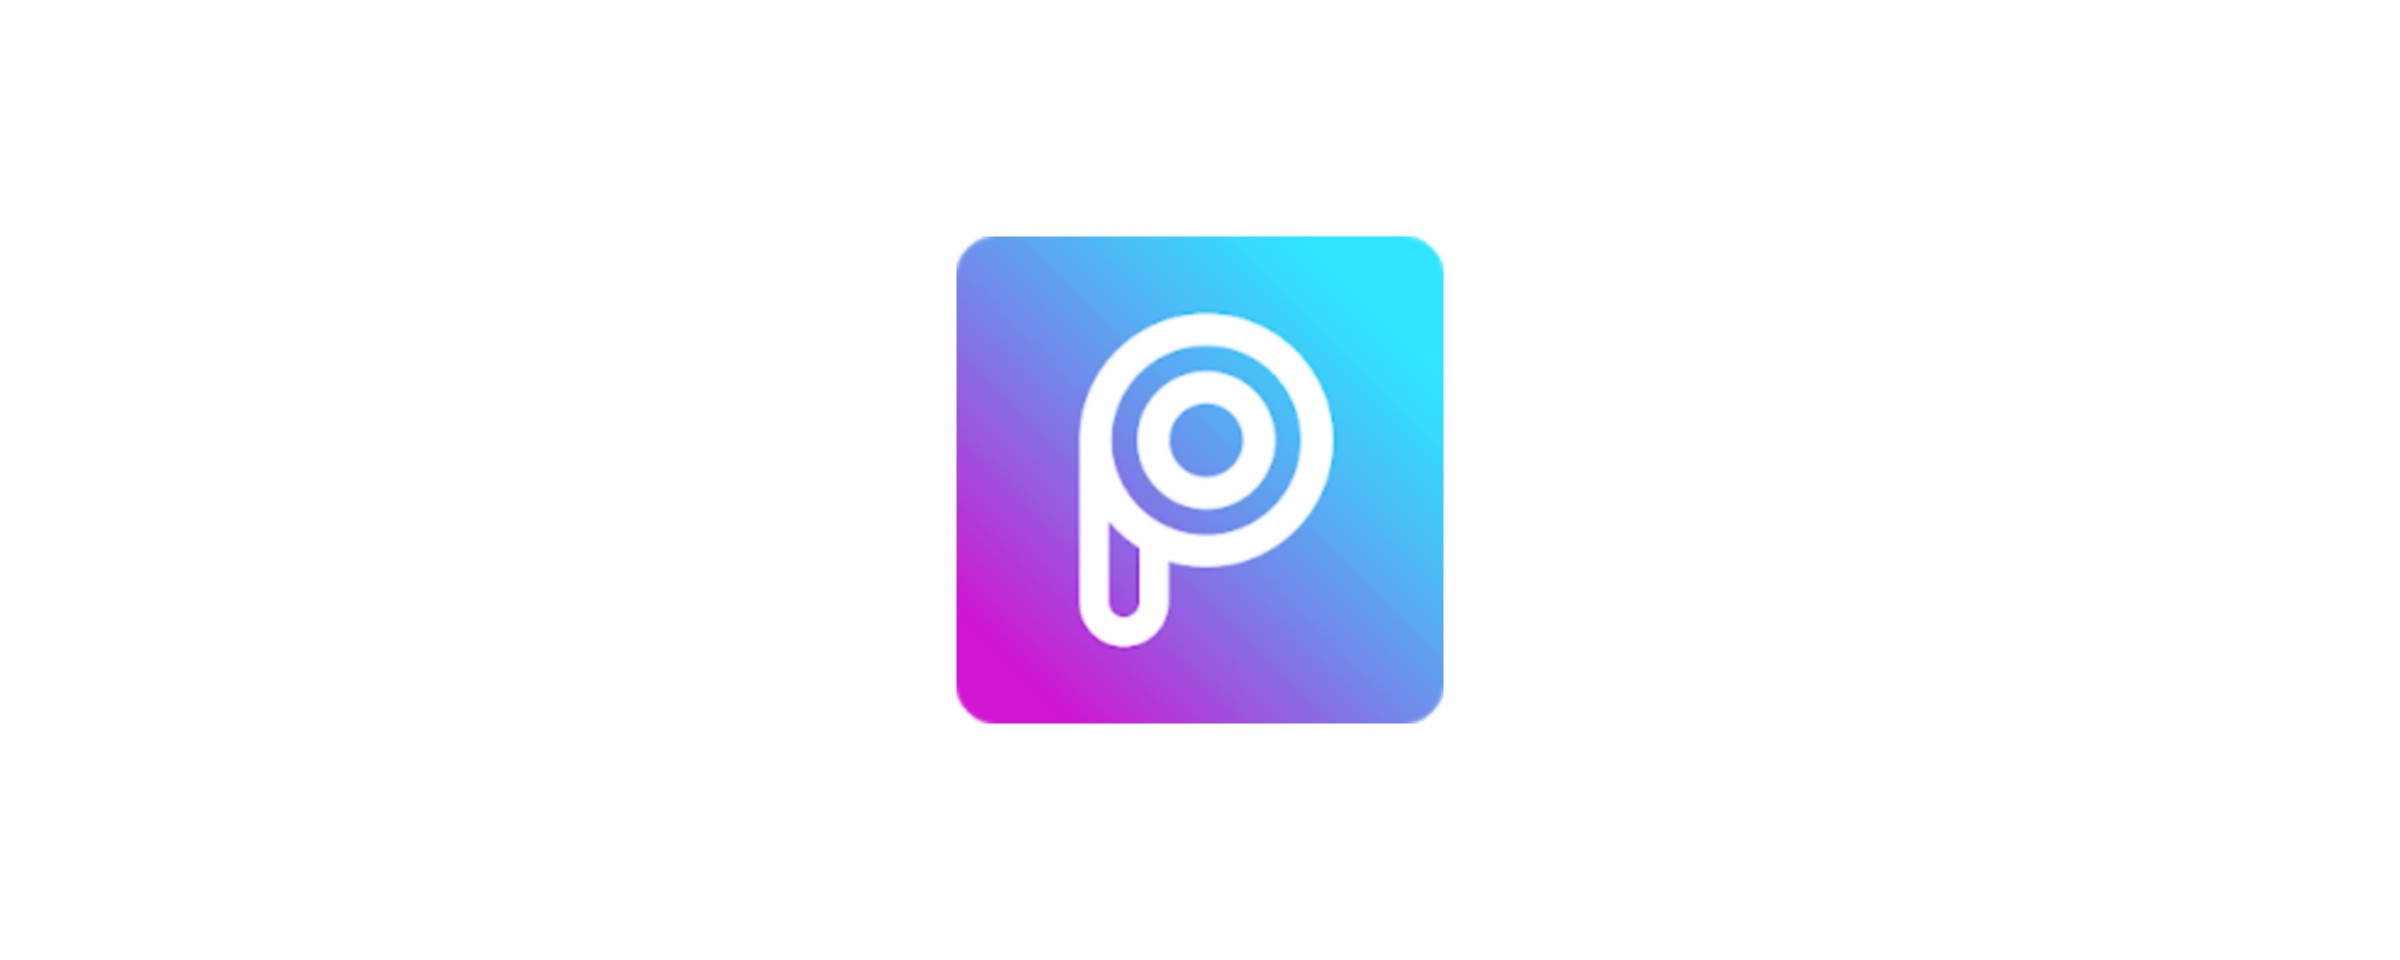 picsart online editor for pc